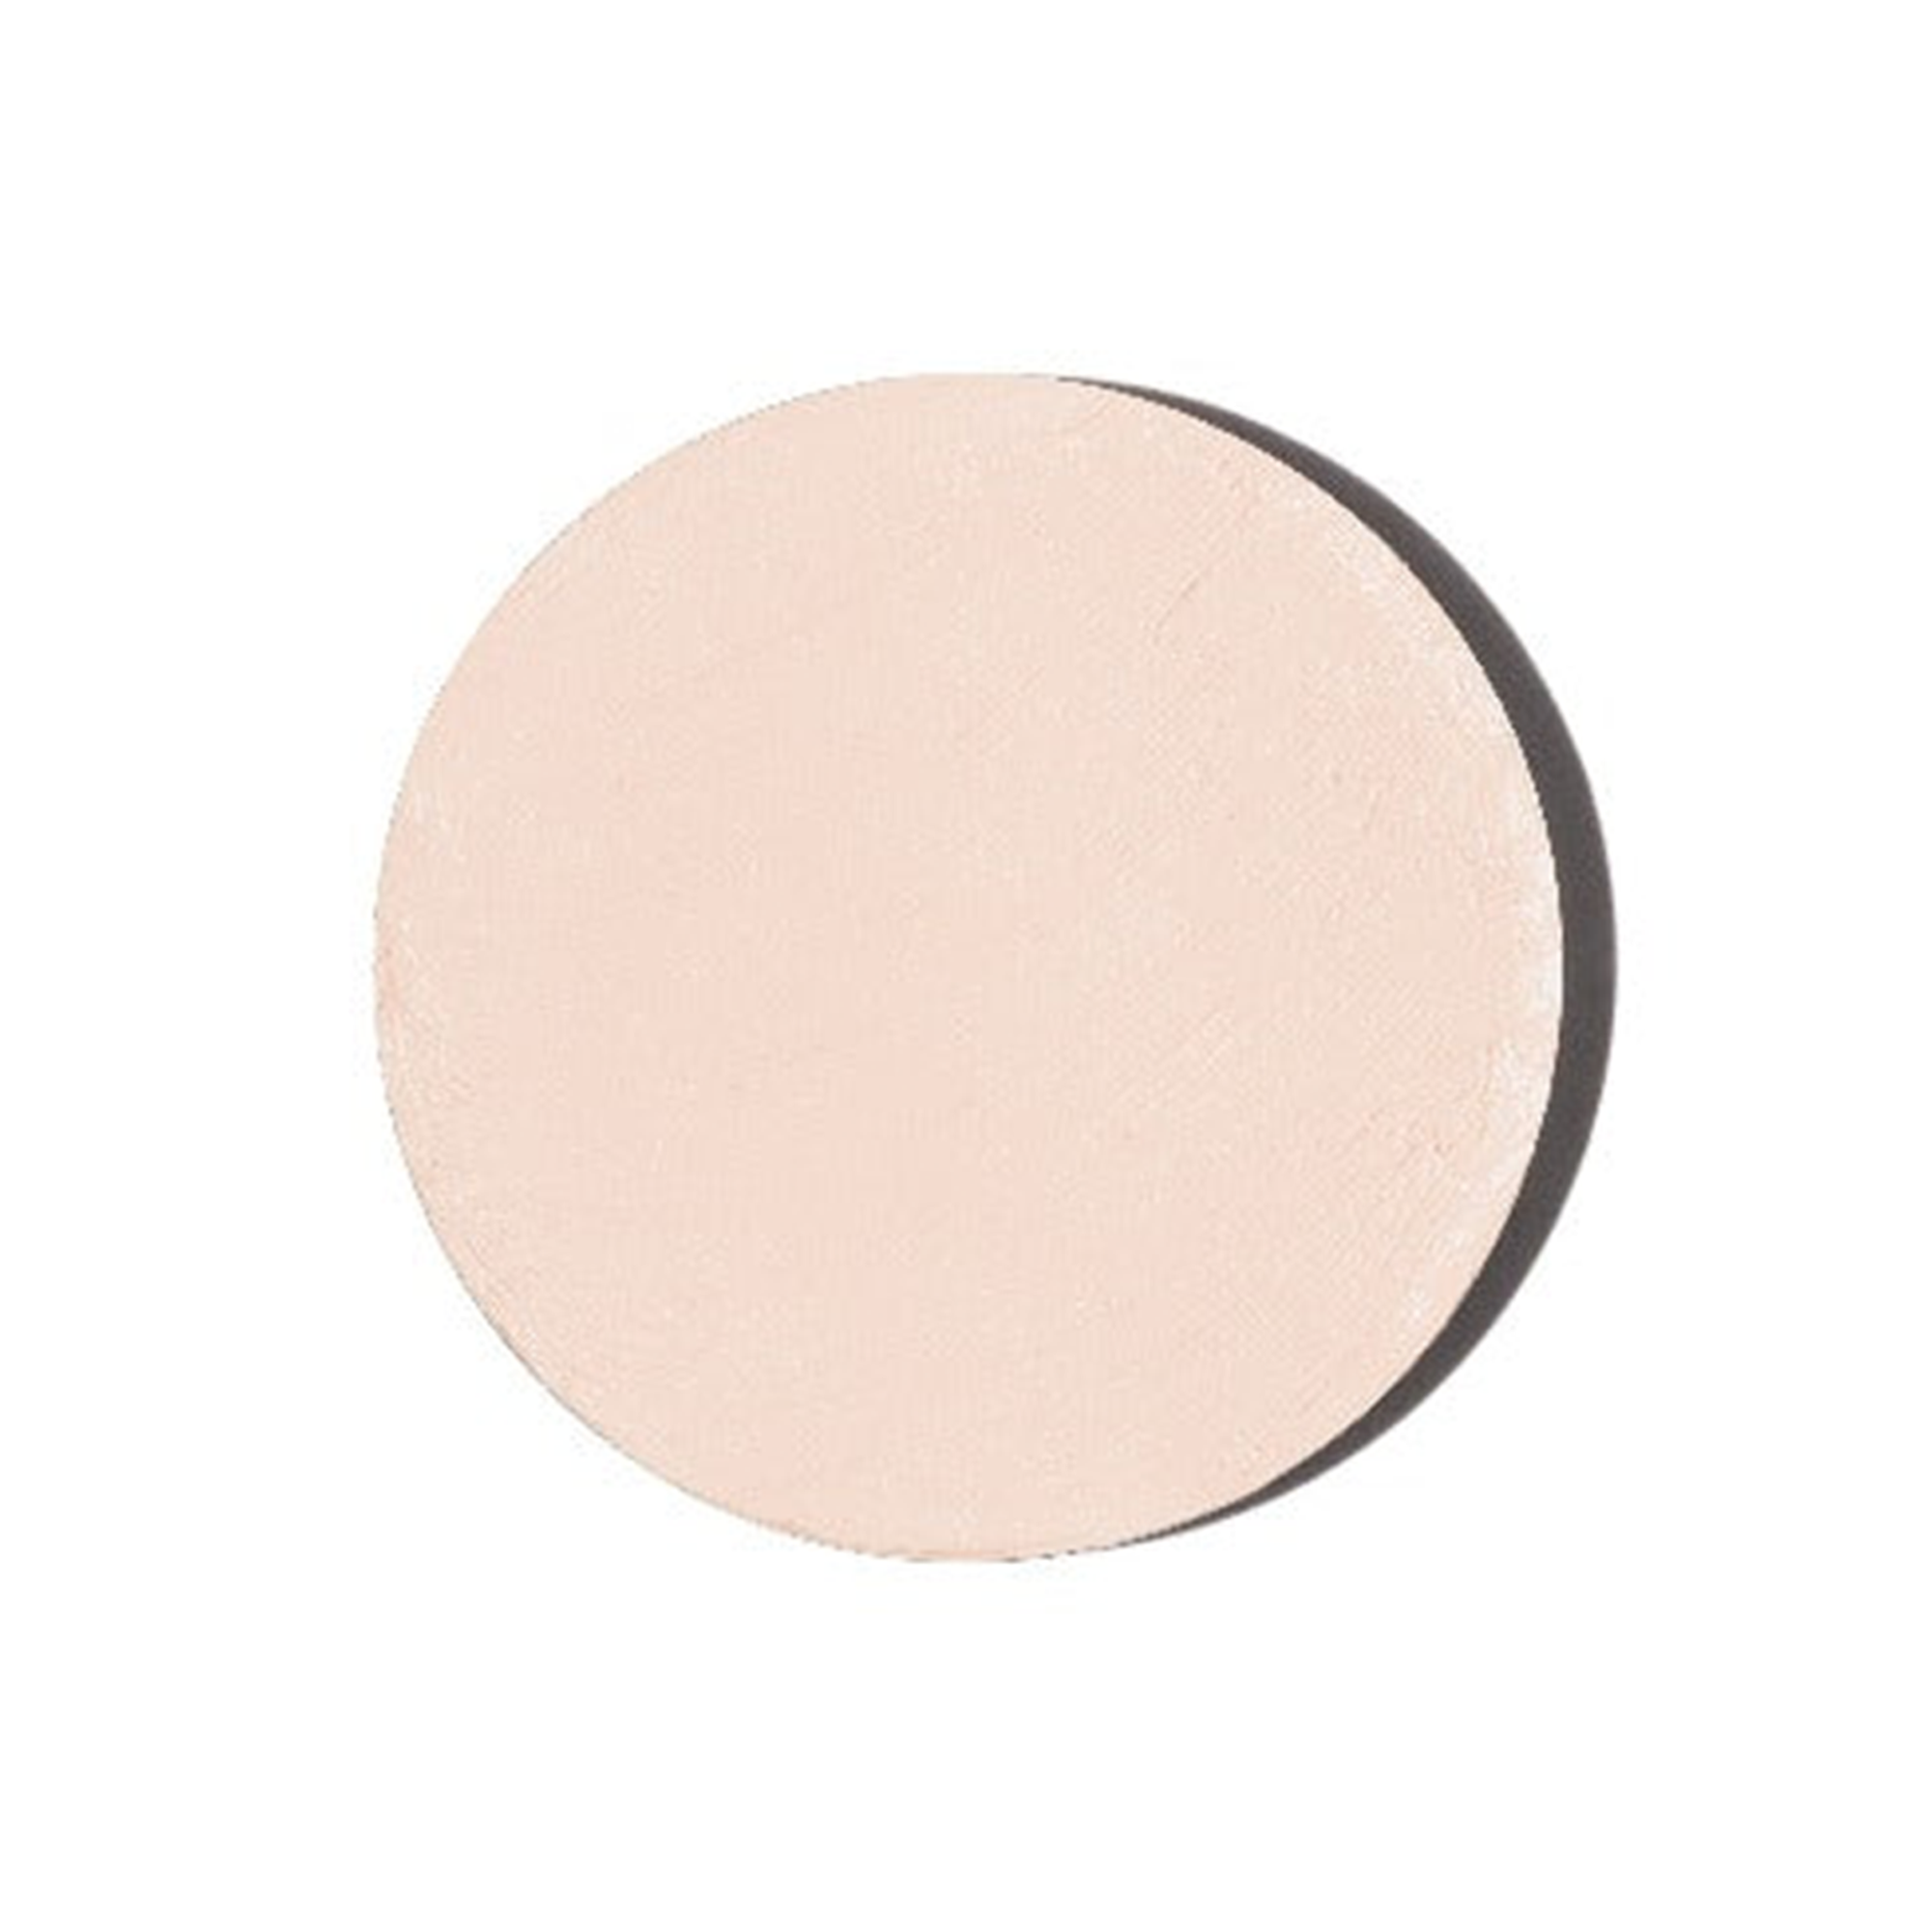 Load image into Gallery viewer, Alima Pure Cream Concealer
